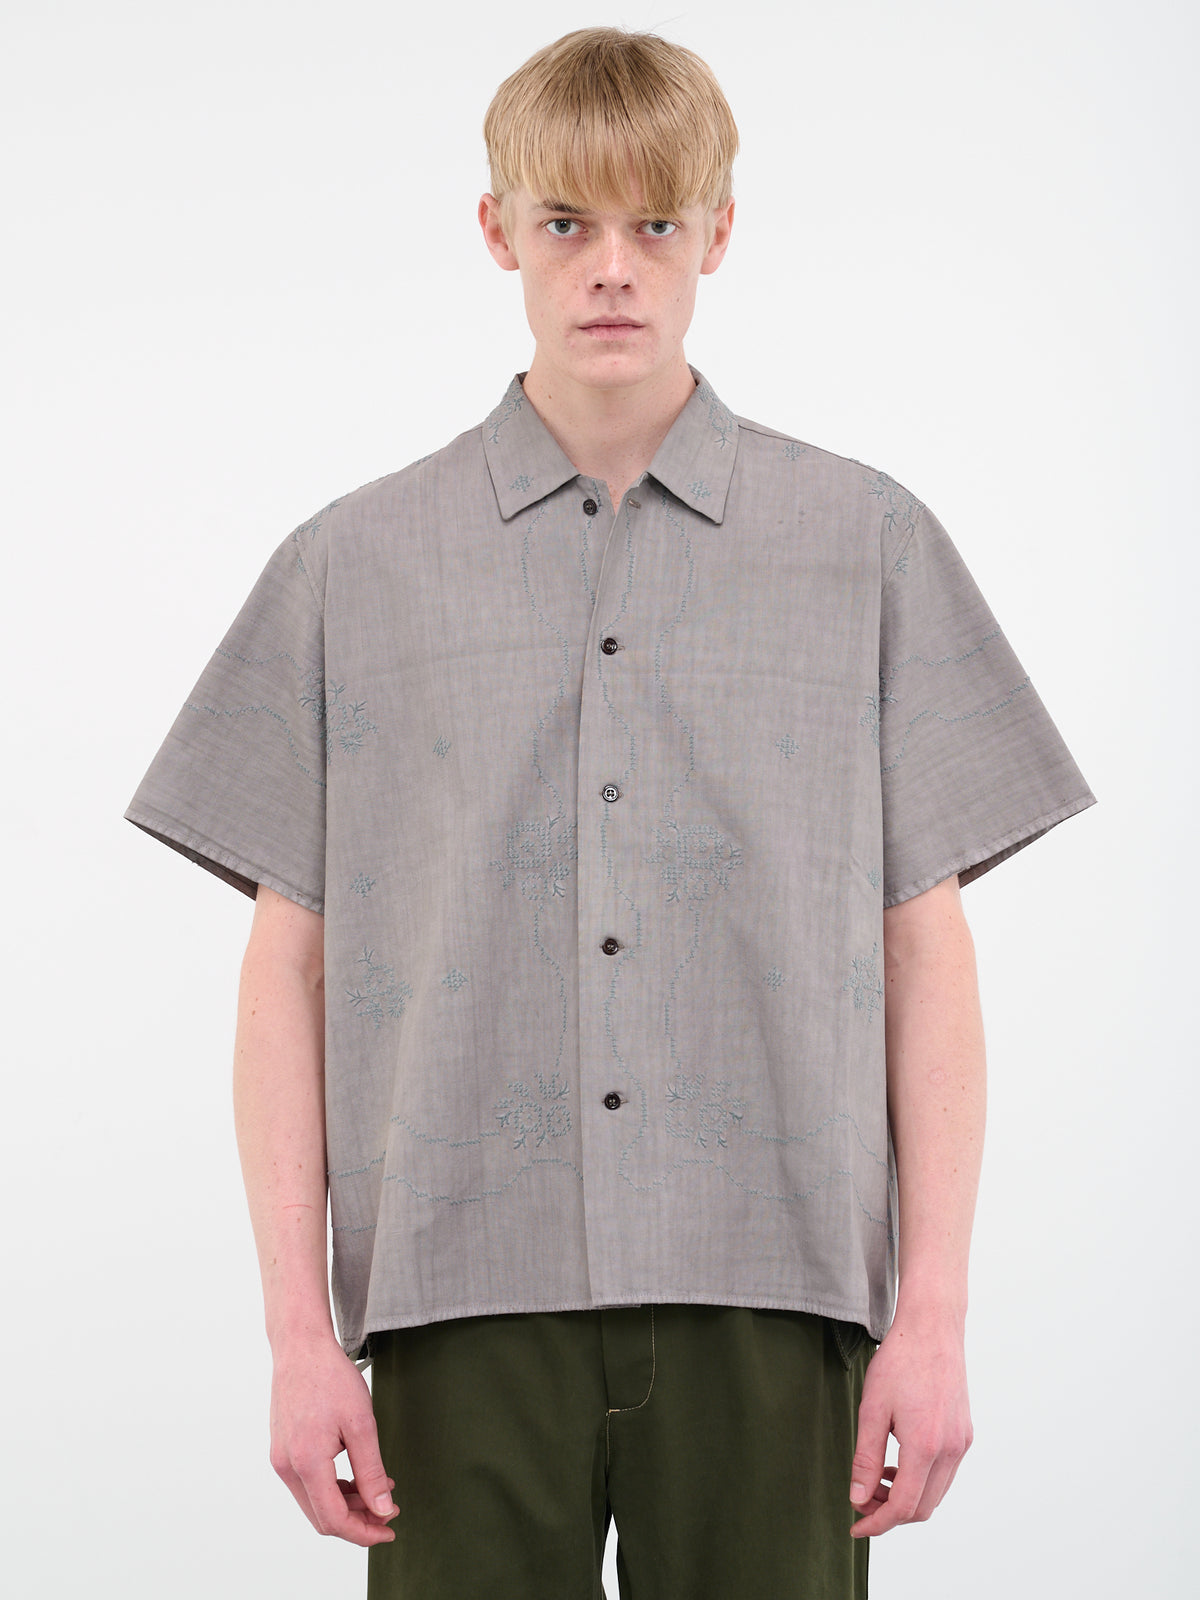 Embroidered Shirt (DDMCC0007-STONE)